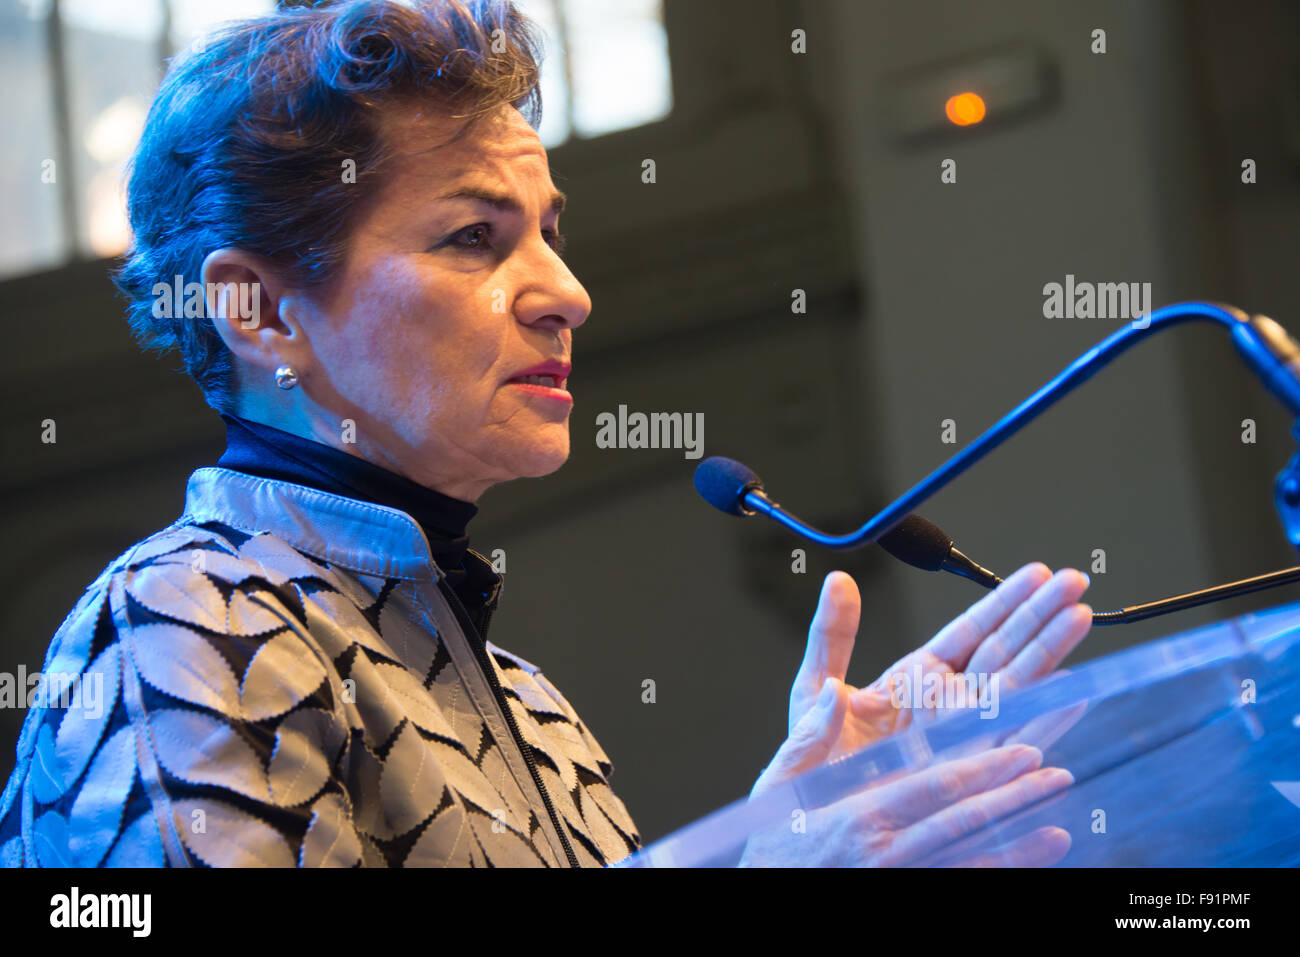 Christiana Figueres, Executive Secretary of the United Nations Framework Convention on Climate Change, speaks after being presented with some 1.8 million signatures on an interfaith petition for climate justice during the COP21 climate summit in Paris, France, November 28, 2015. Stock Photo